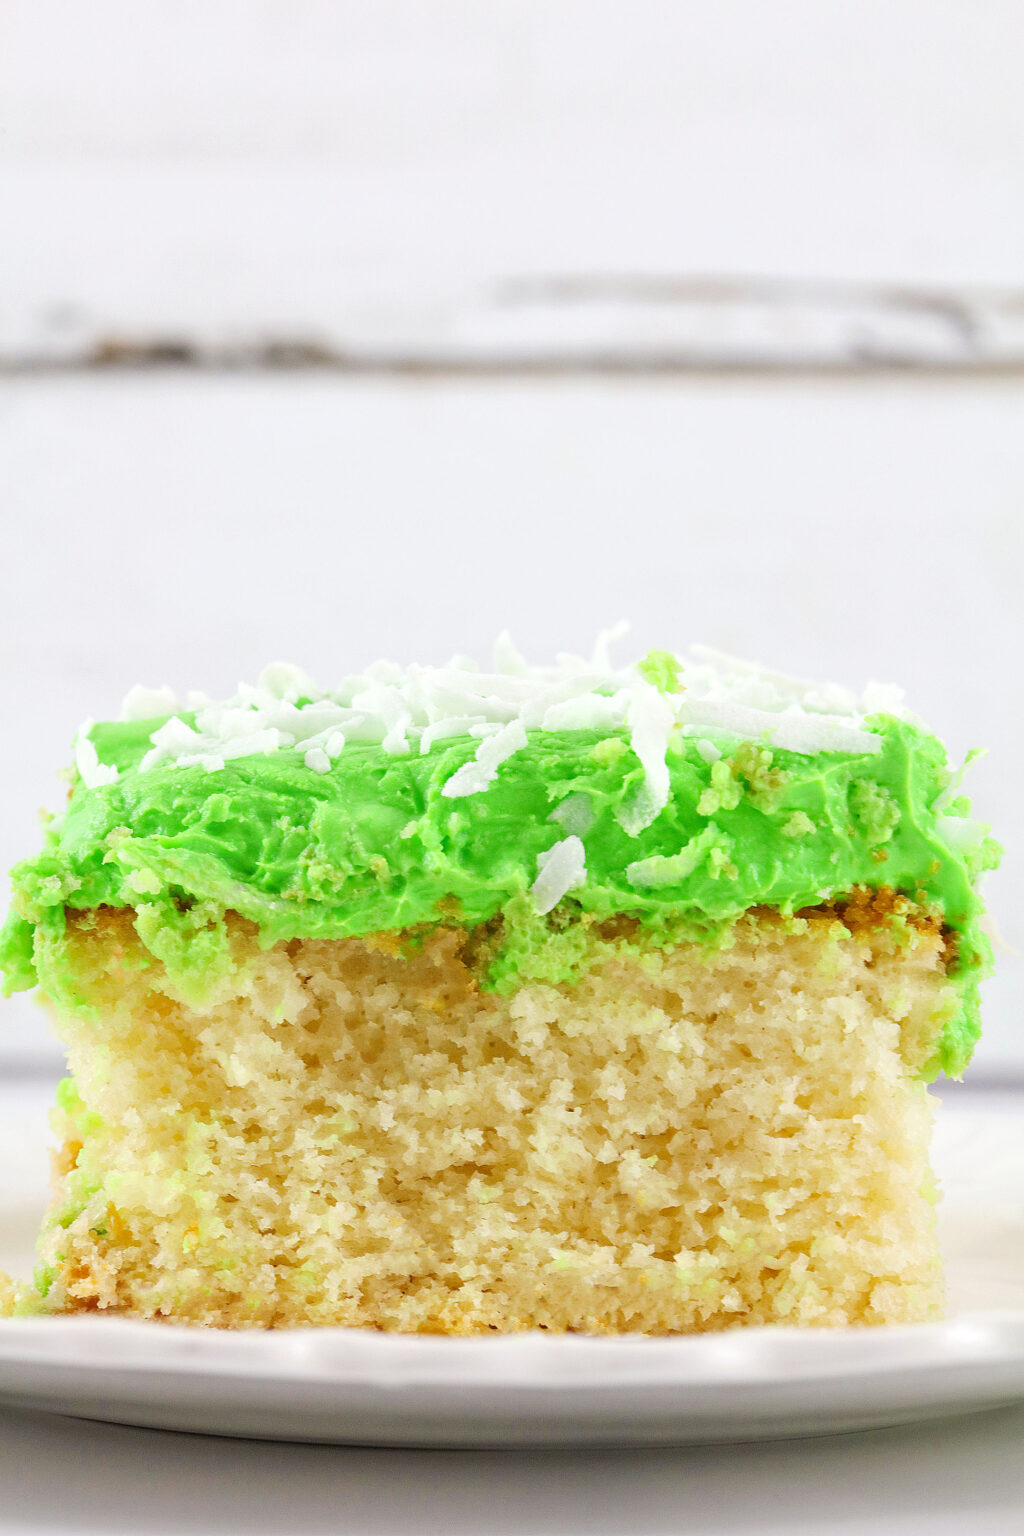 up close view of a slice of mountain dew cake on a plate